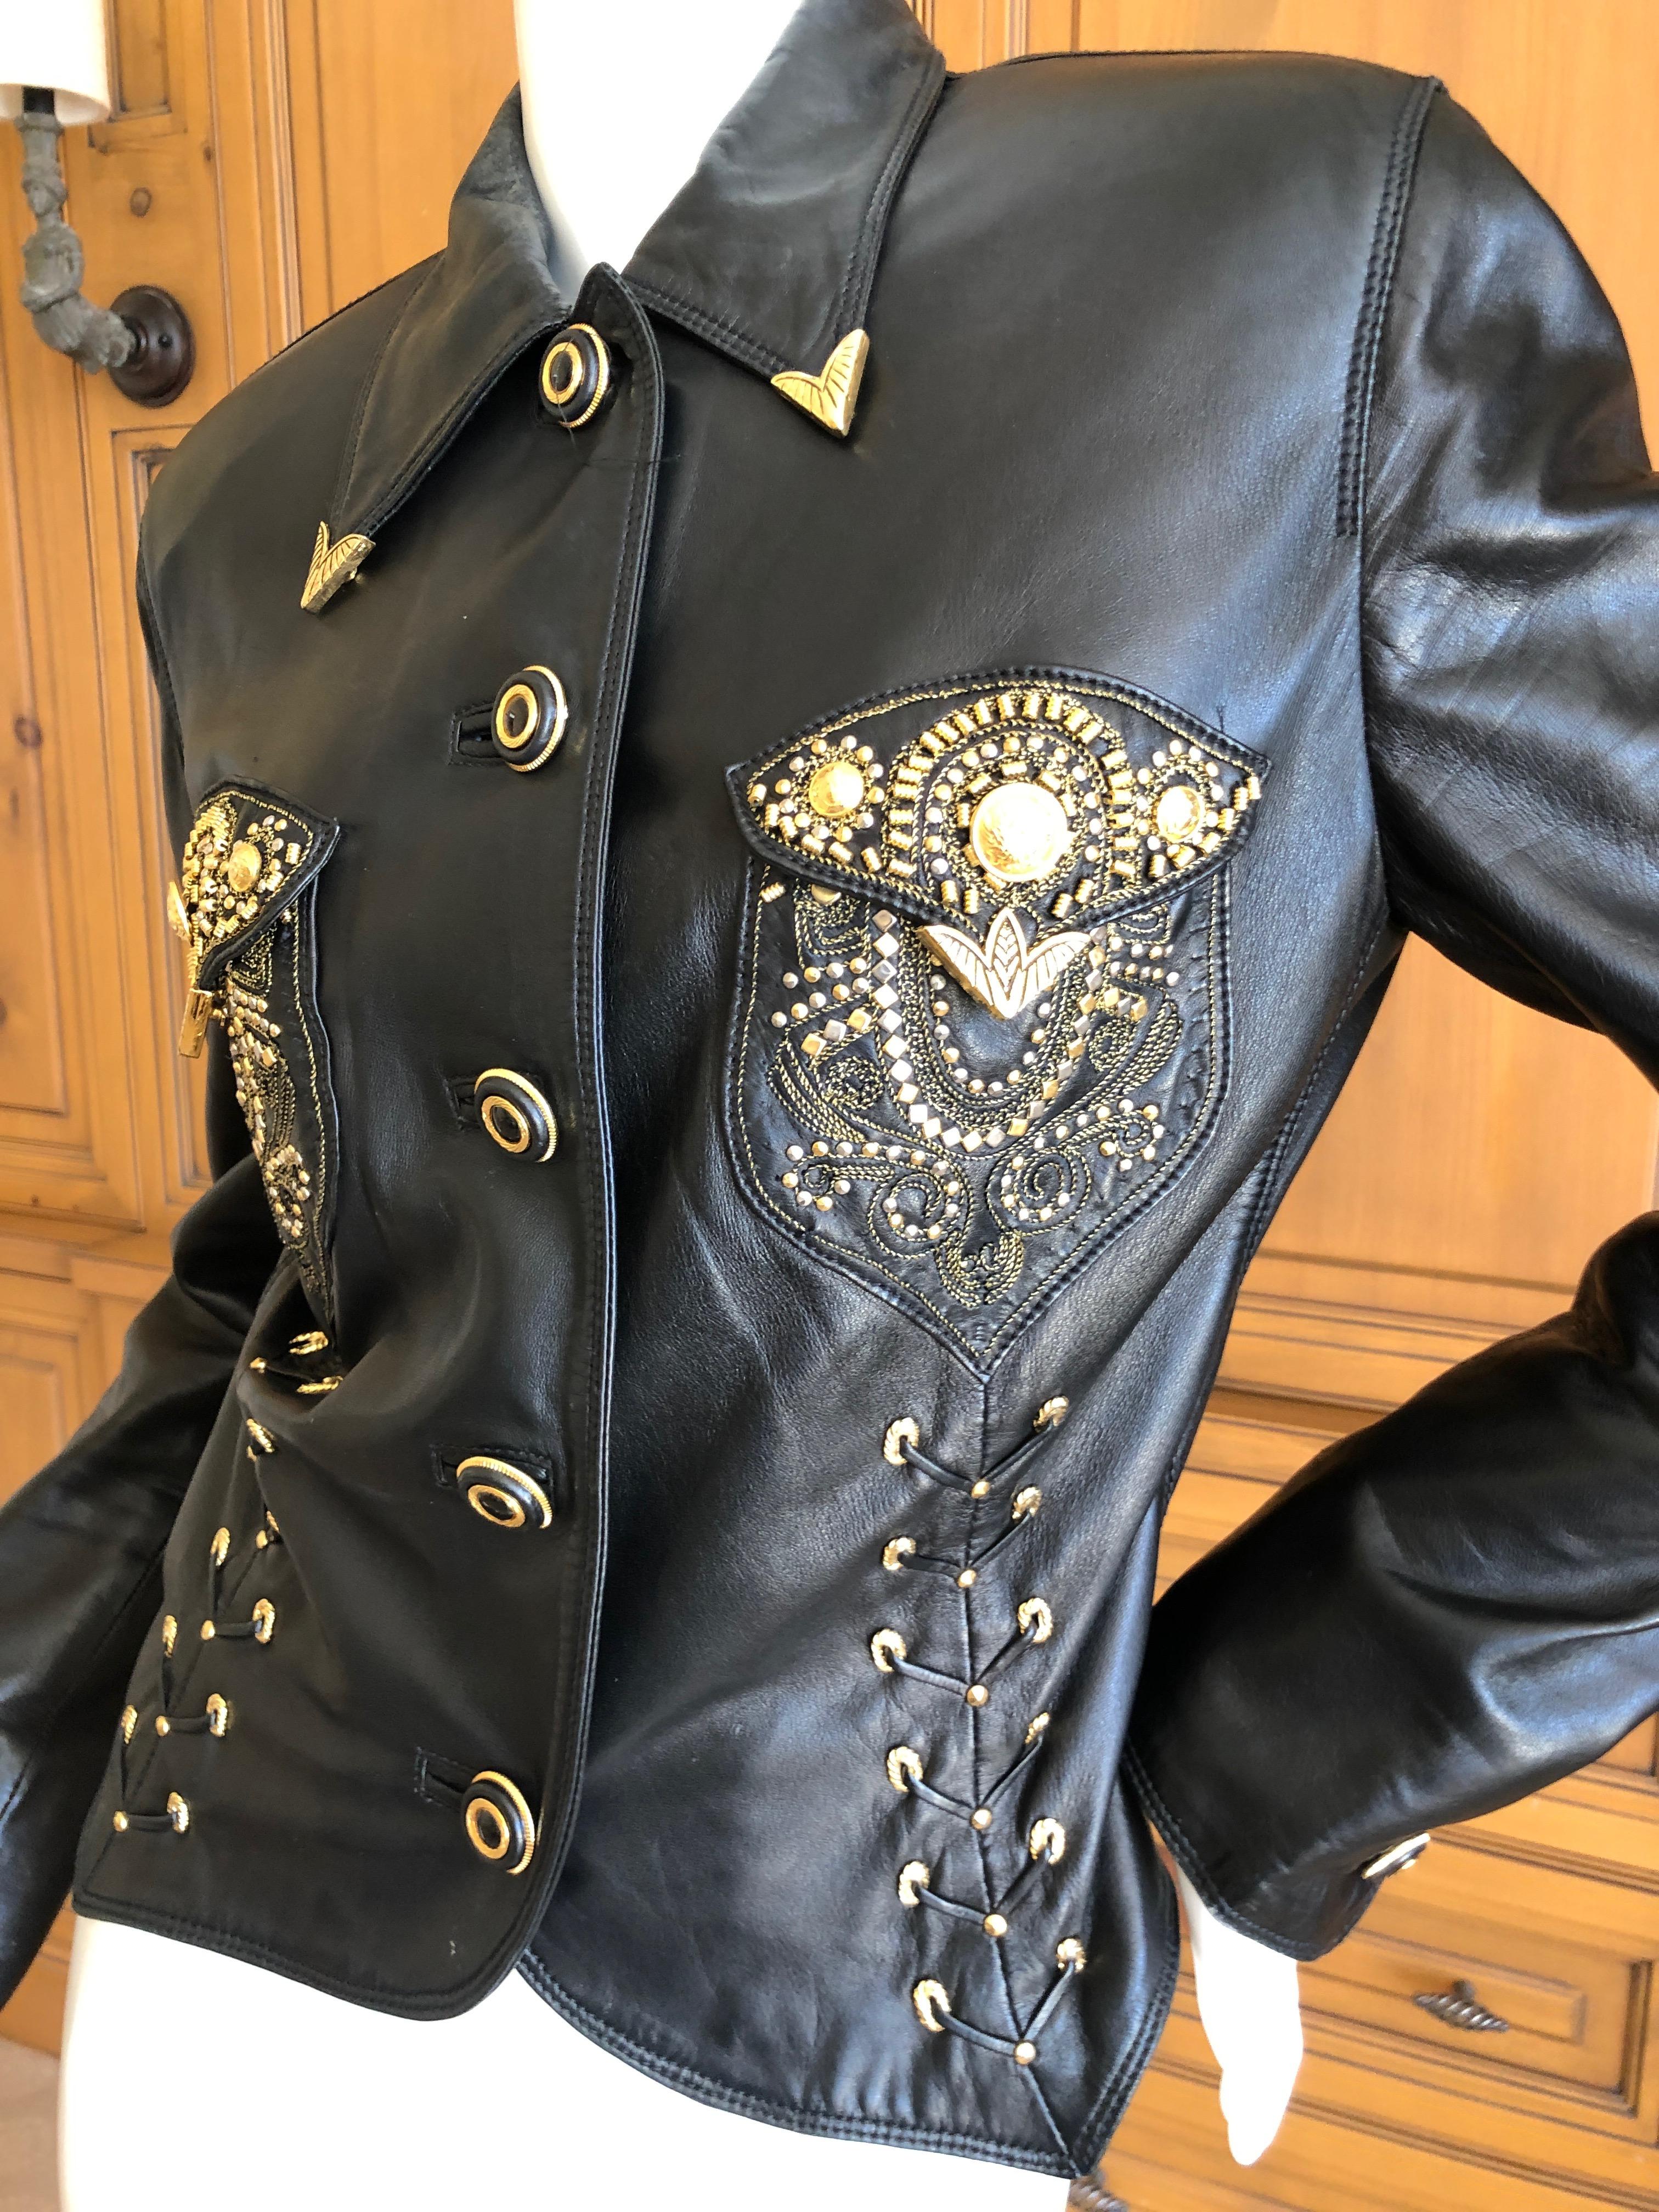 Gianni Versace 1990 Lambskin Leather Moto Jacket with Gold Embellishment For Sale 1